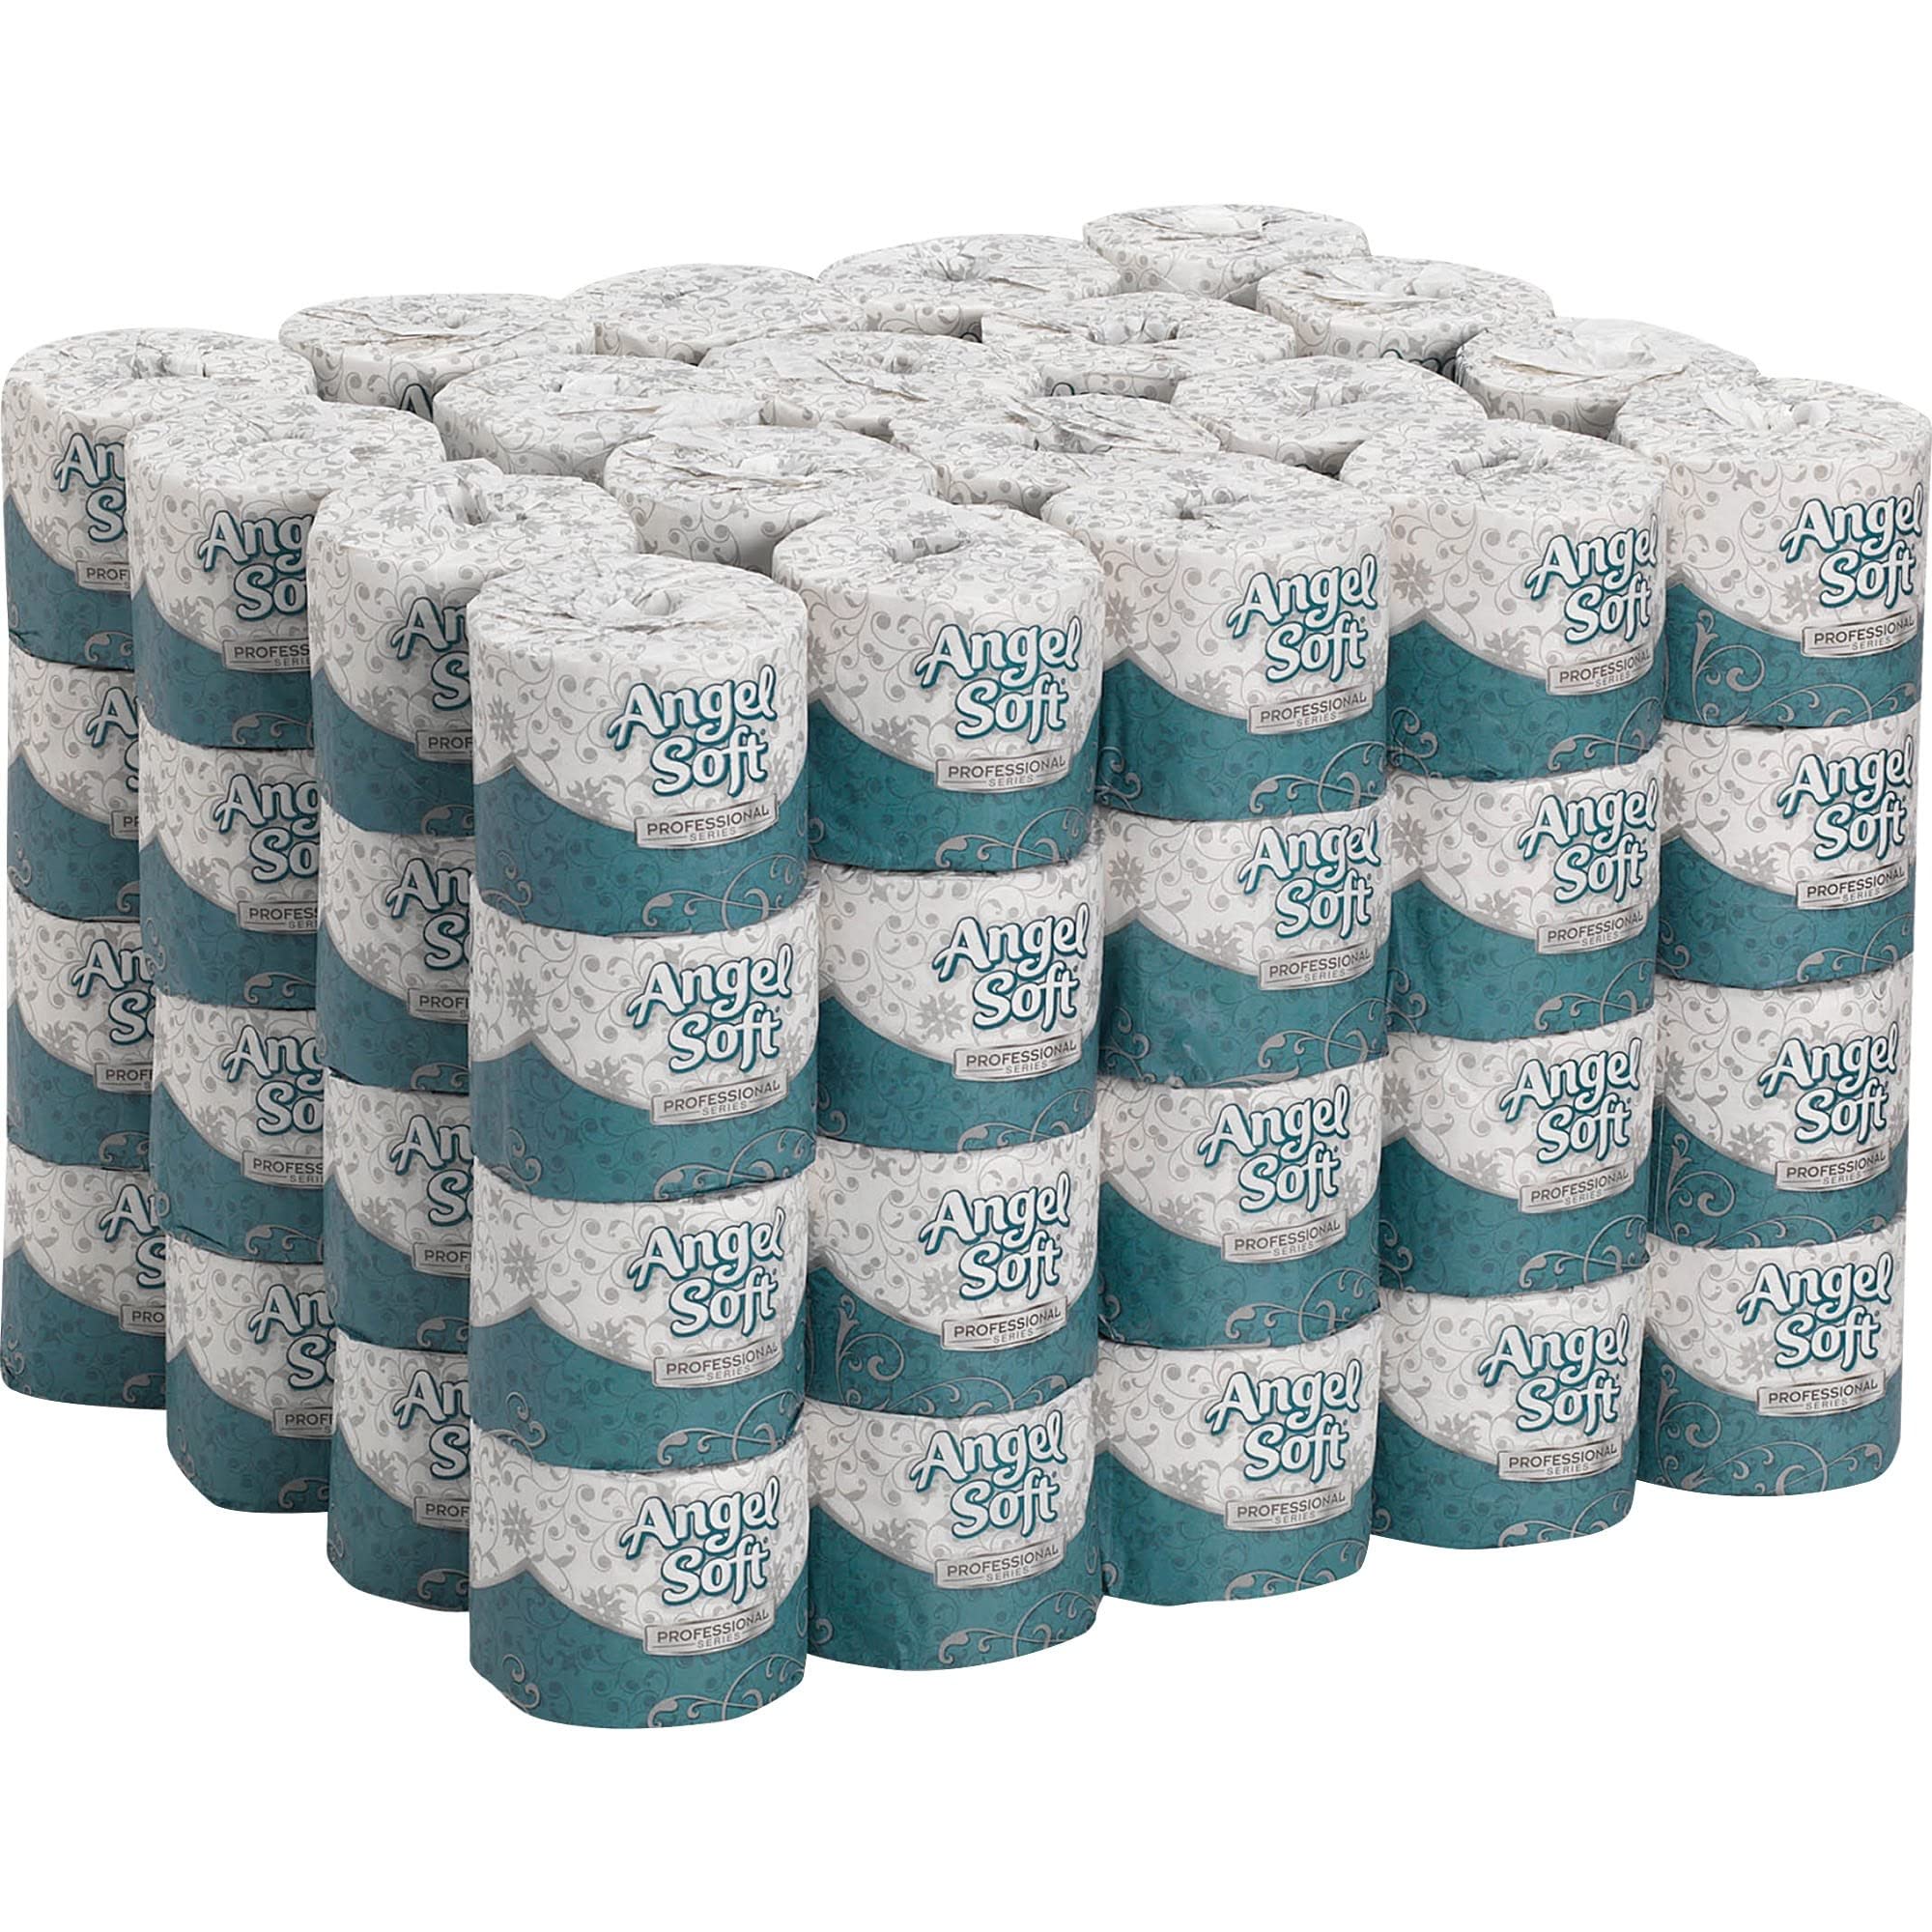 Toilet Paper, Angel Soft ps, 2Ply, PK80